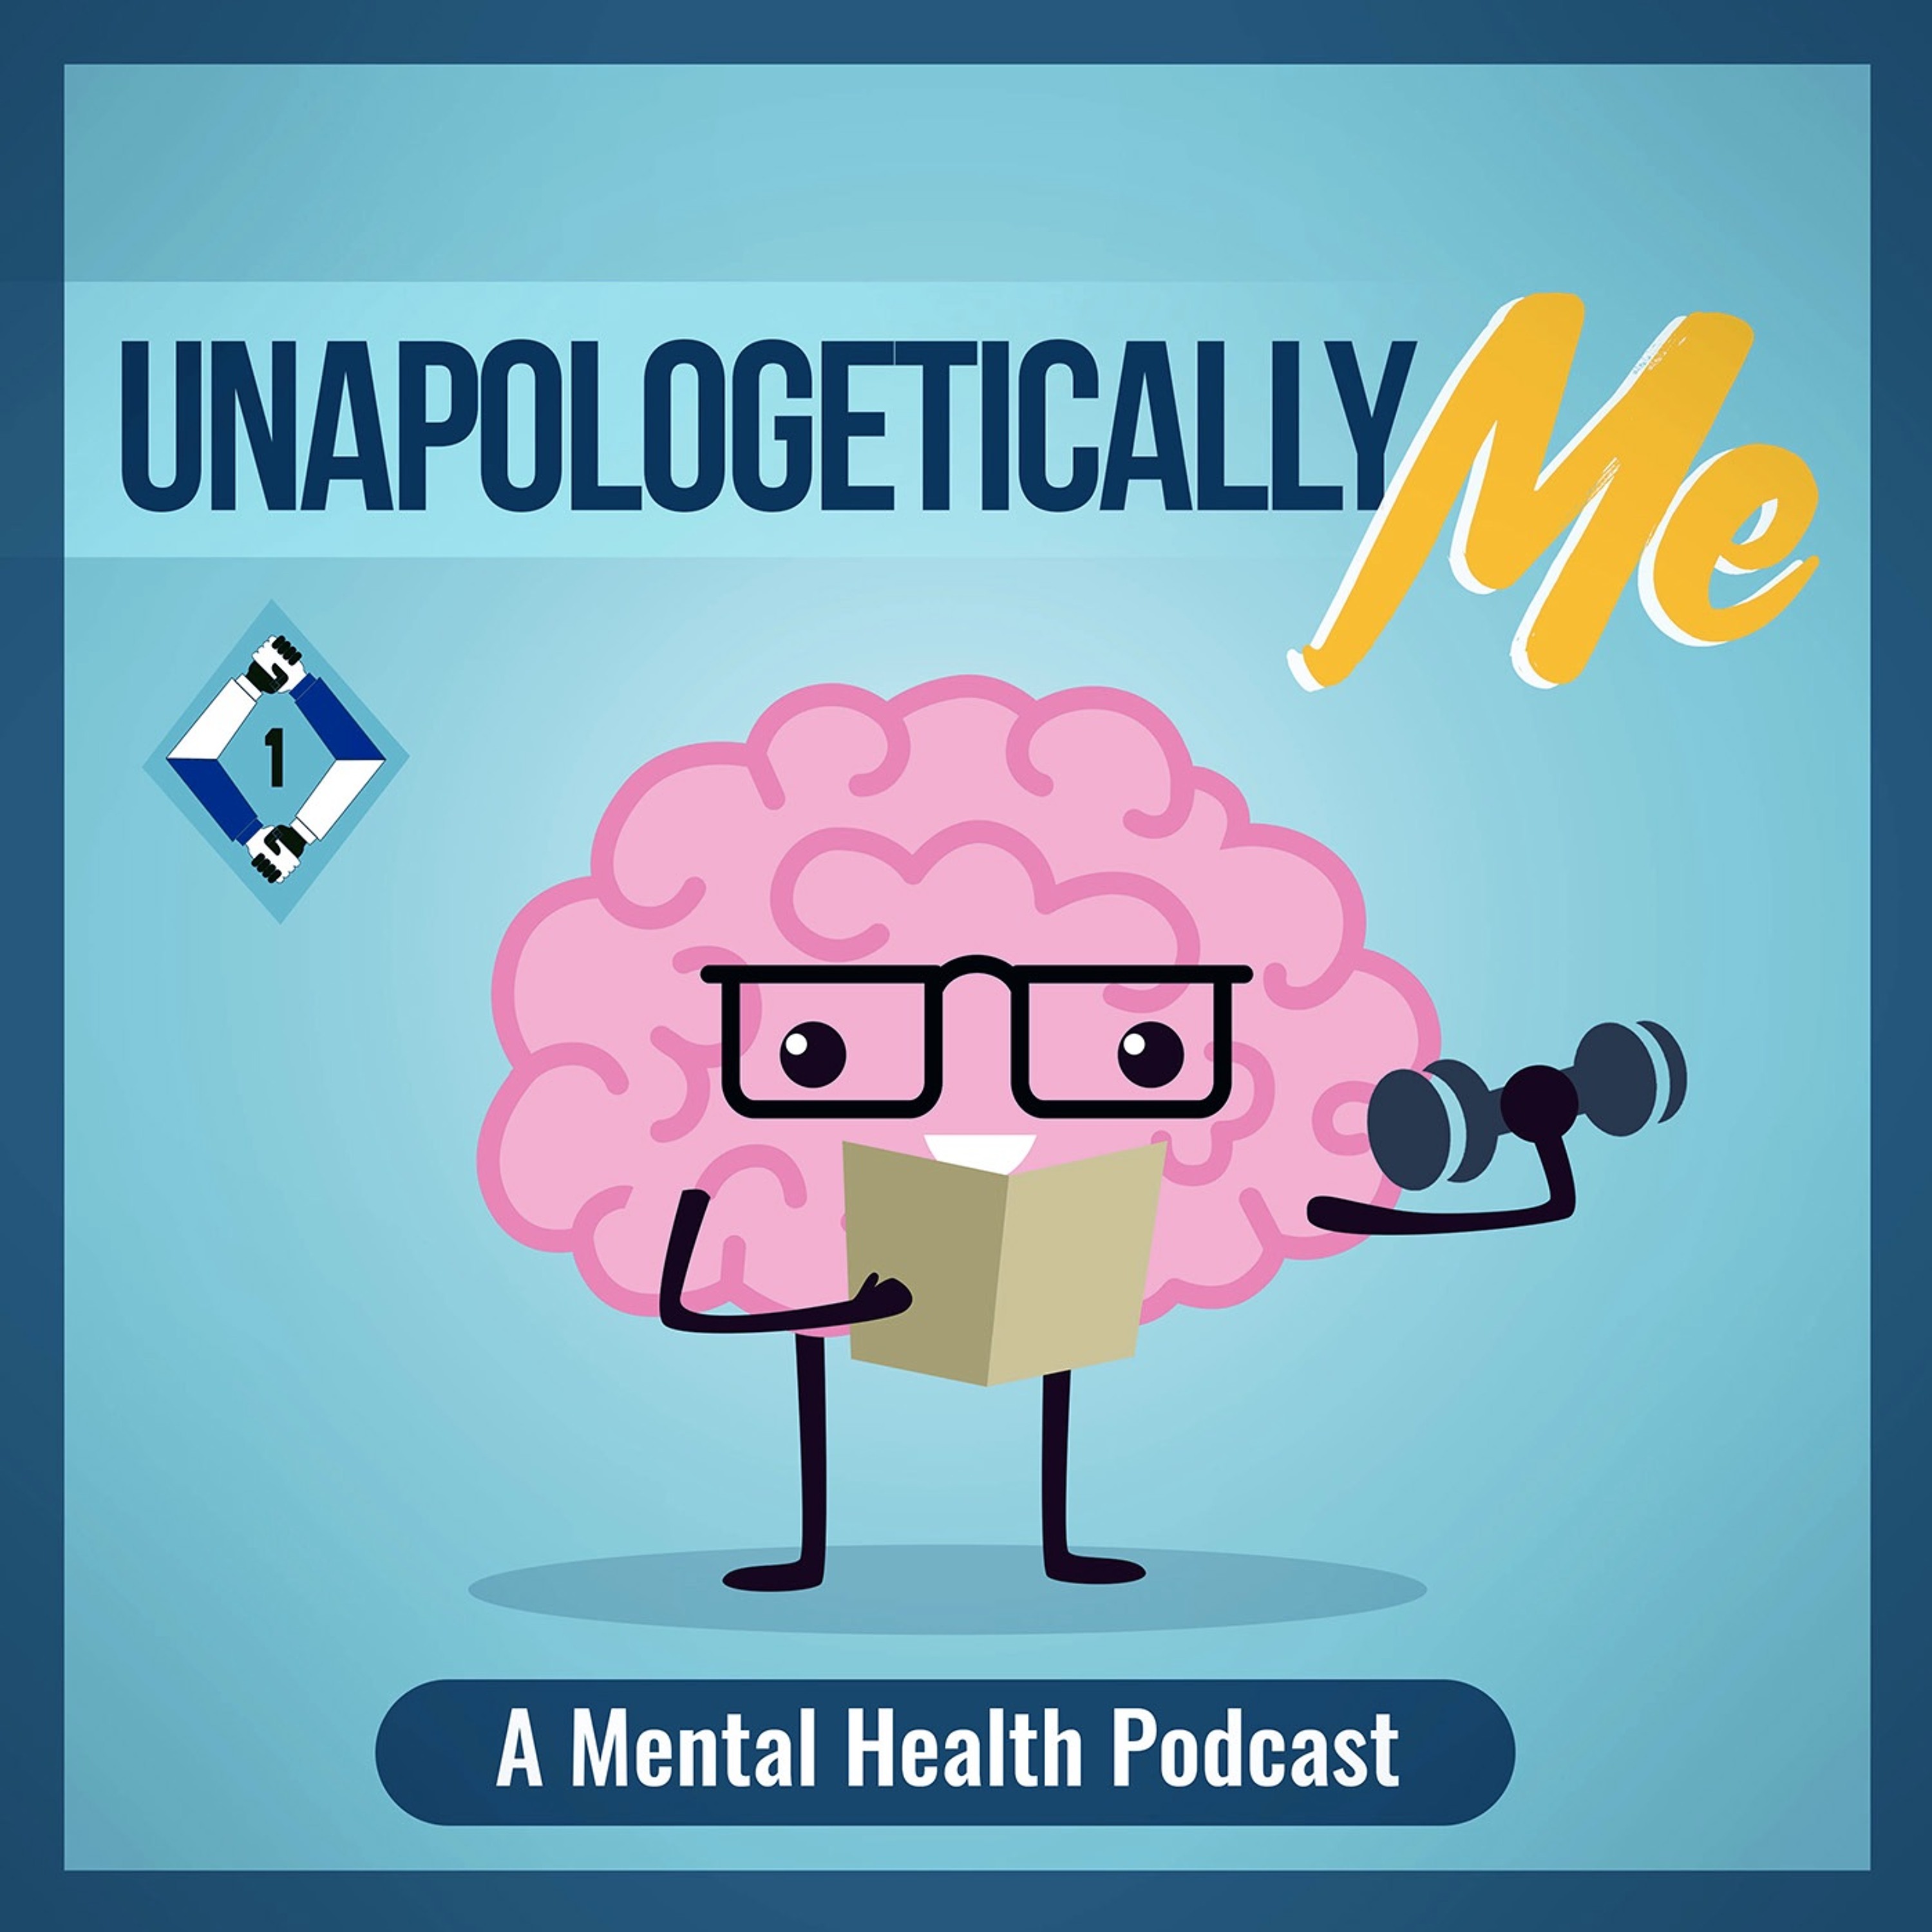 Unapologetically Me: A Mental Health Podcast - The Wake Up Project